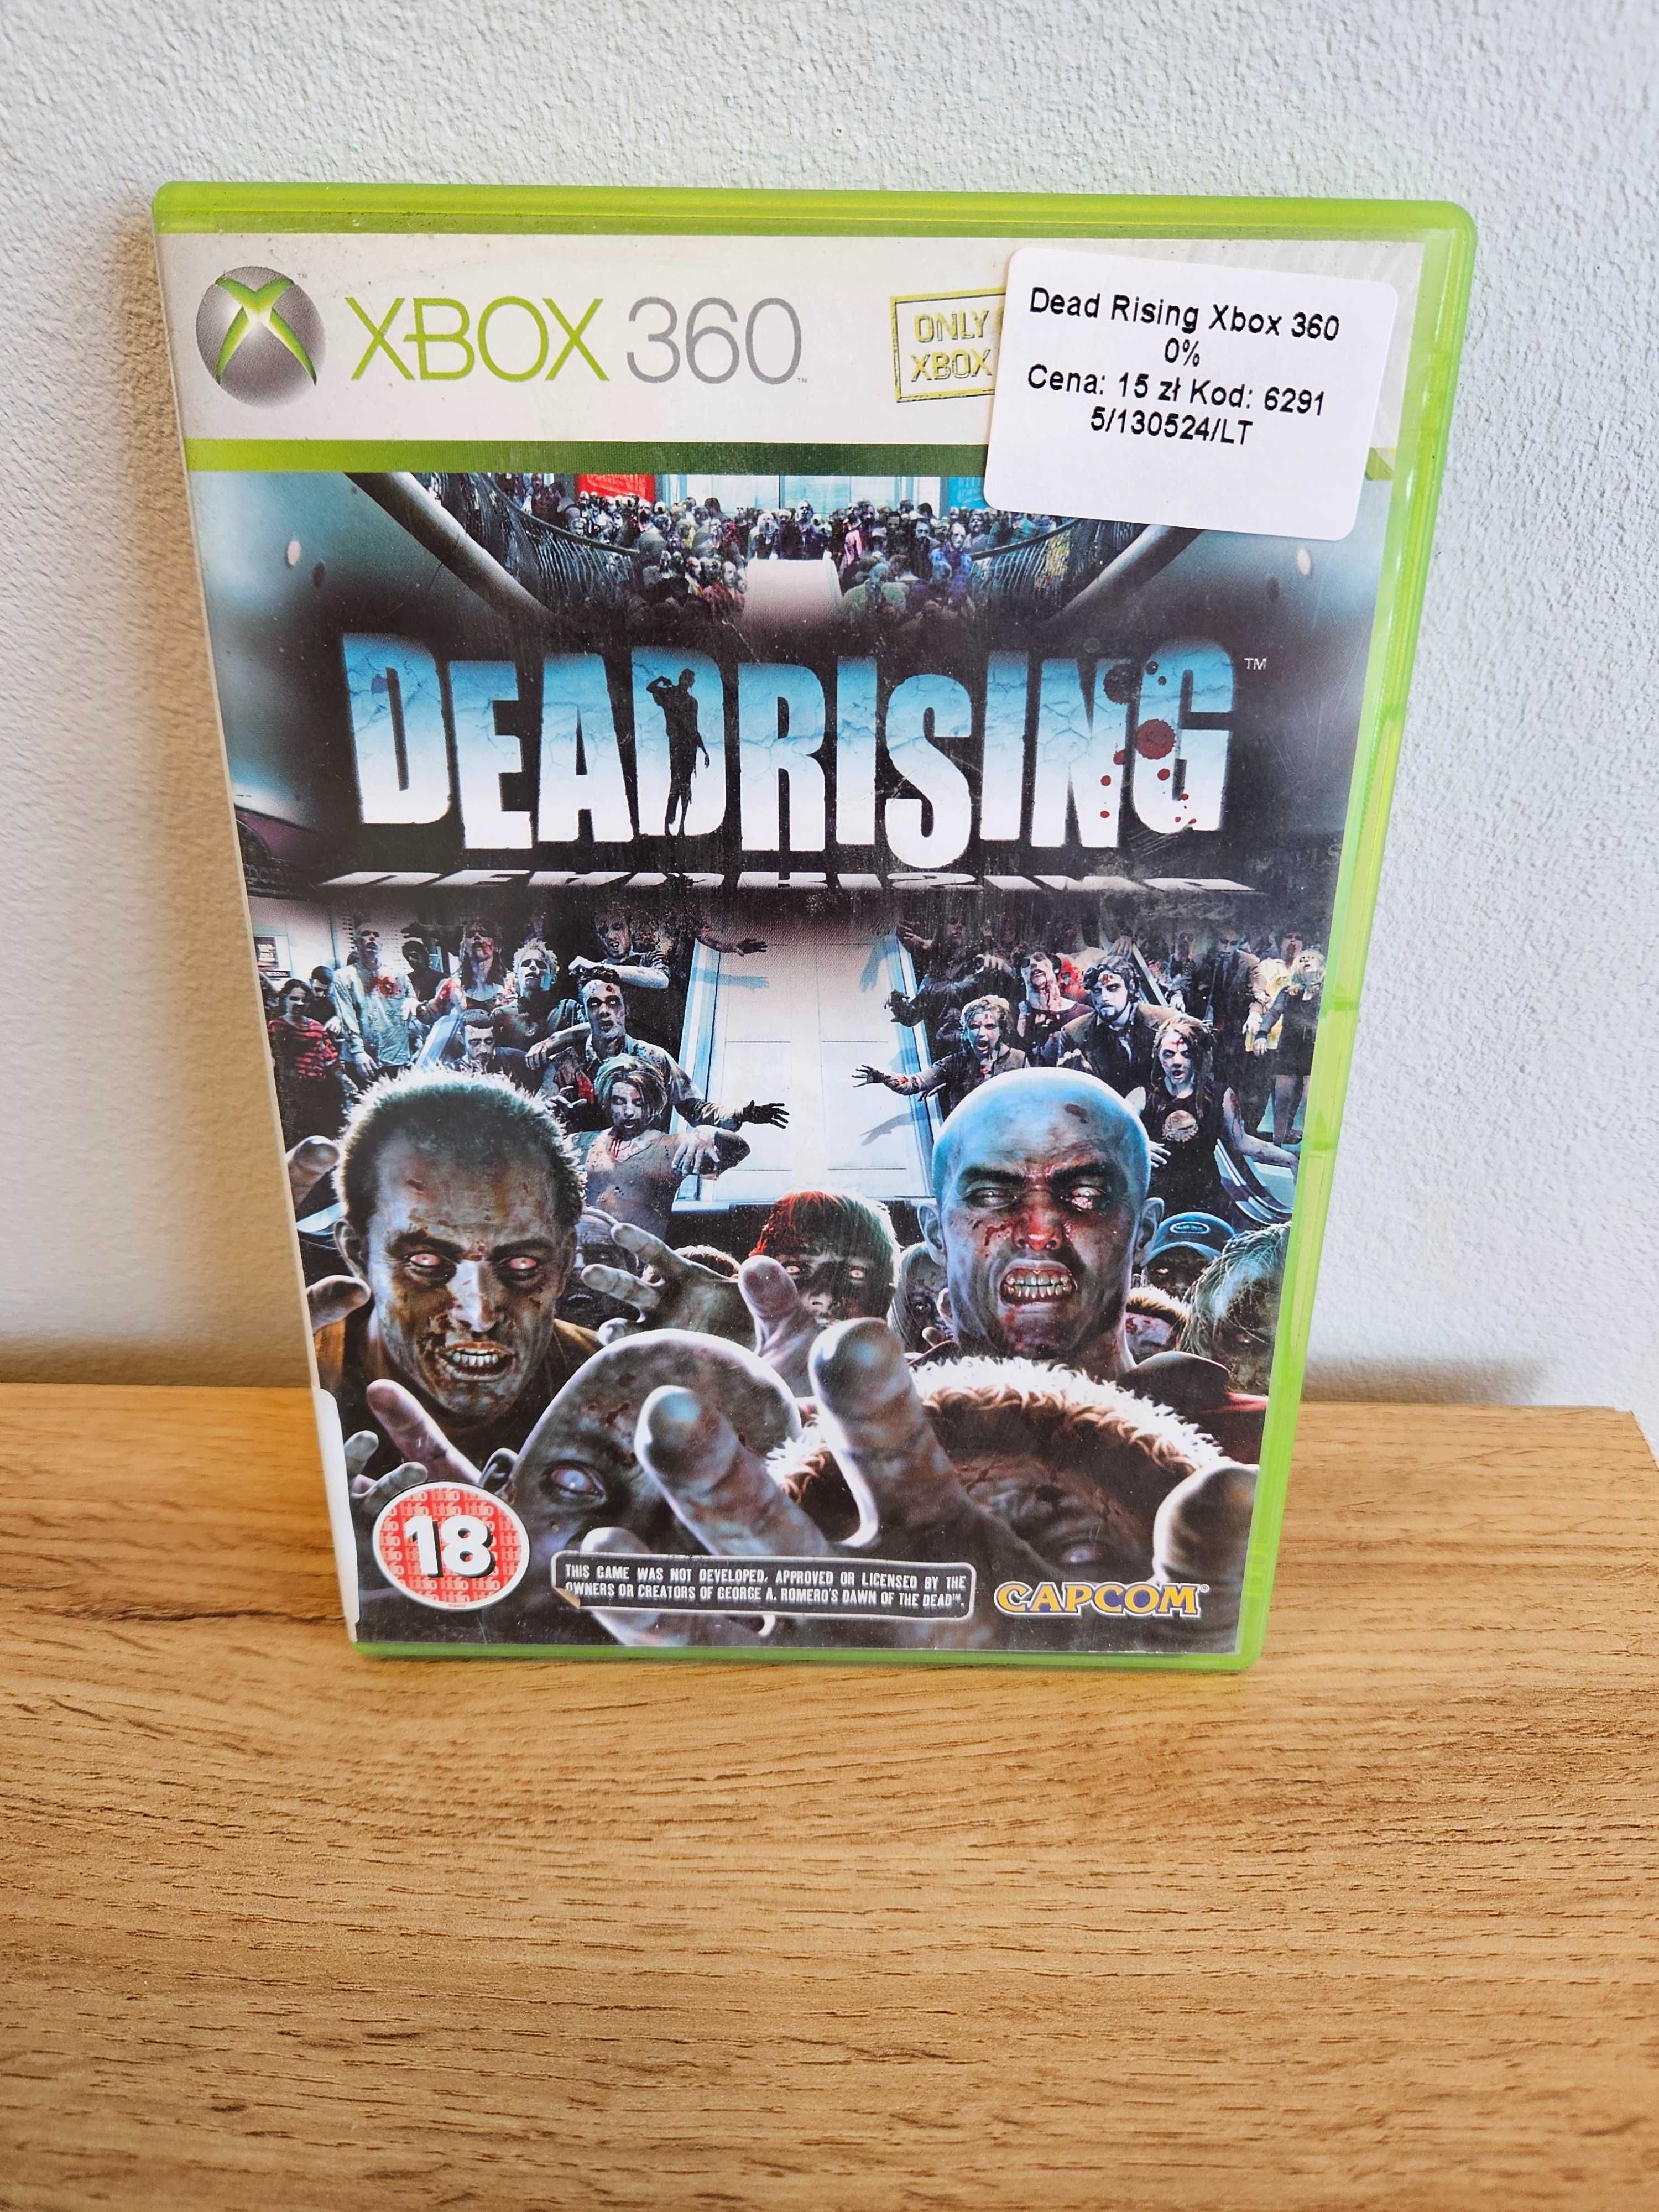 Dead Rising Xbox 360 As Game & GSM 6291